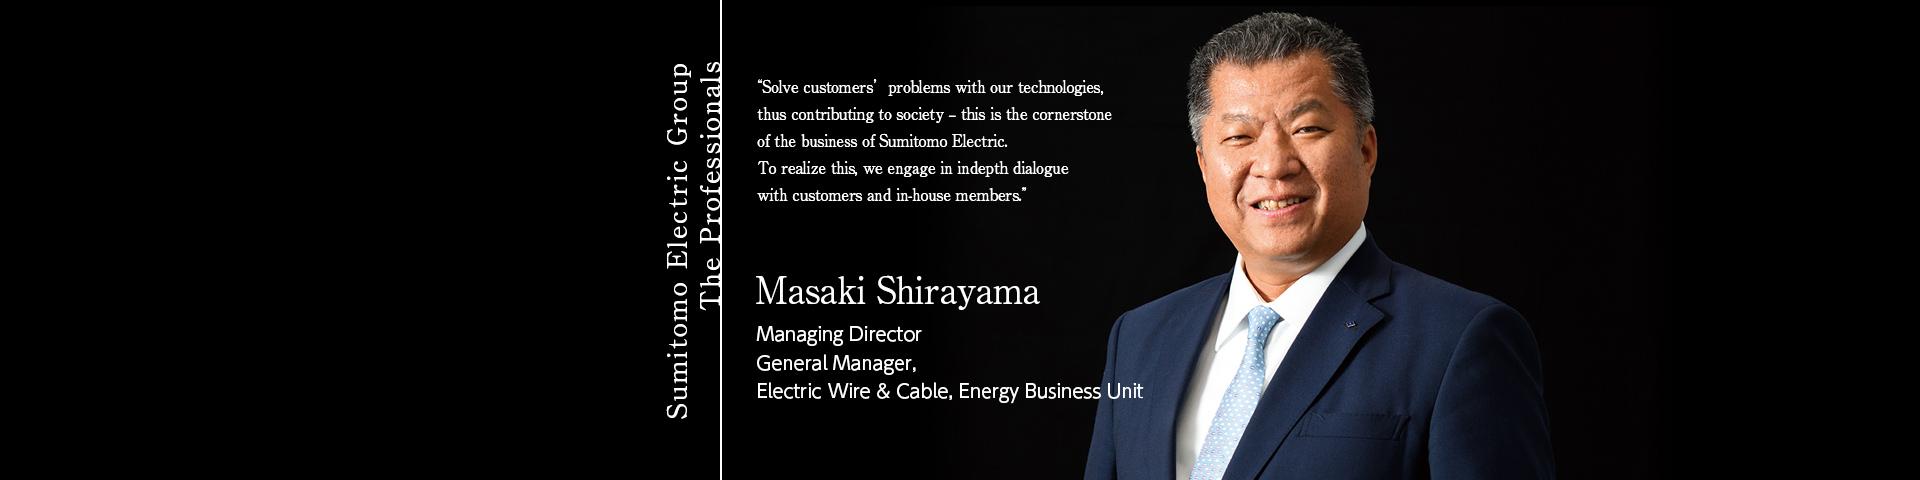 Sumitomo Electric Group The Professionals ~Masaki Shirayama Managing Director General Manager, Electric Wire & Cable, Energy Business Unit~ 